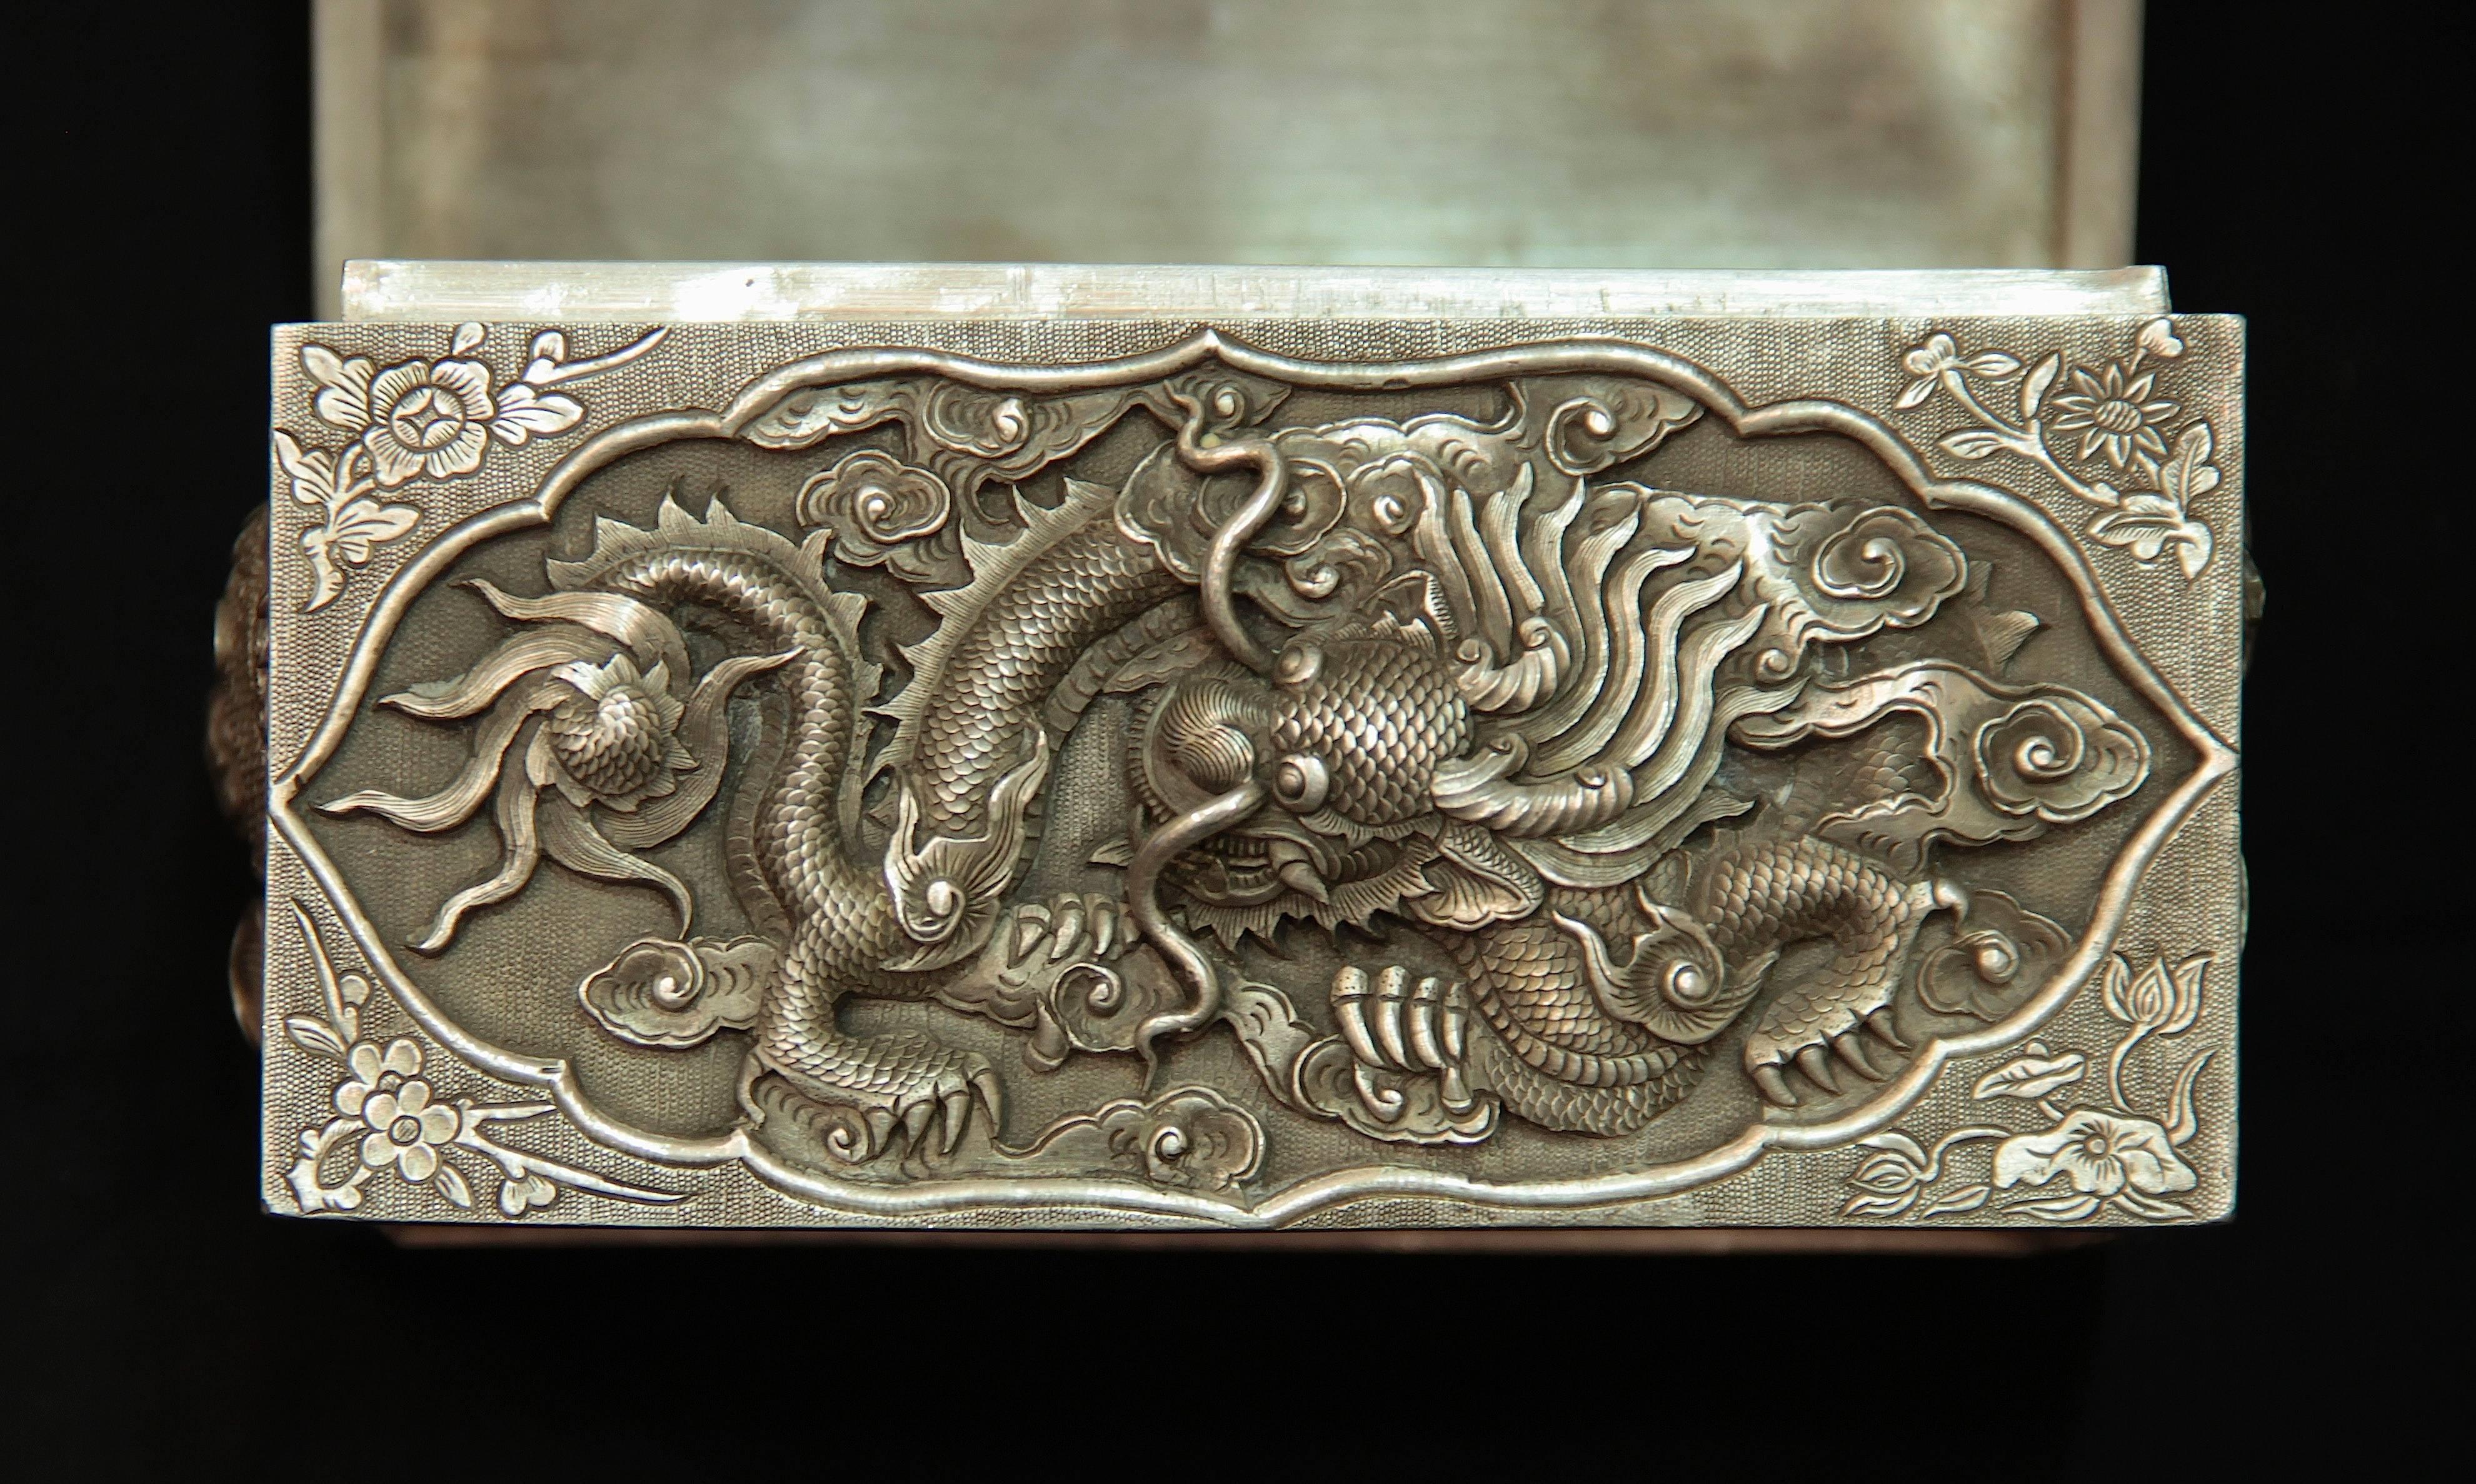 Box,
China, early 20th century.
Engraved silver
Measures: 7 x 12 x 8.5 cm.
Decorated with dragons and inscription.